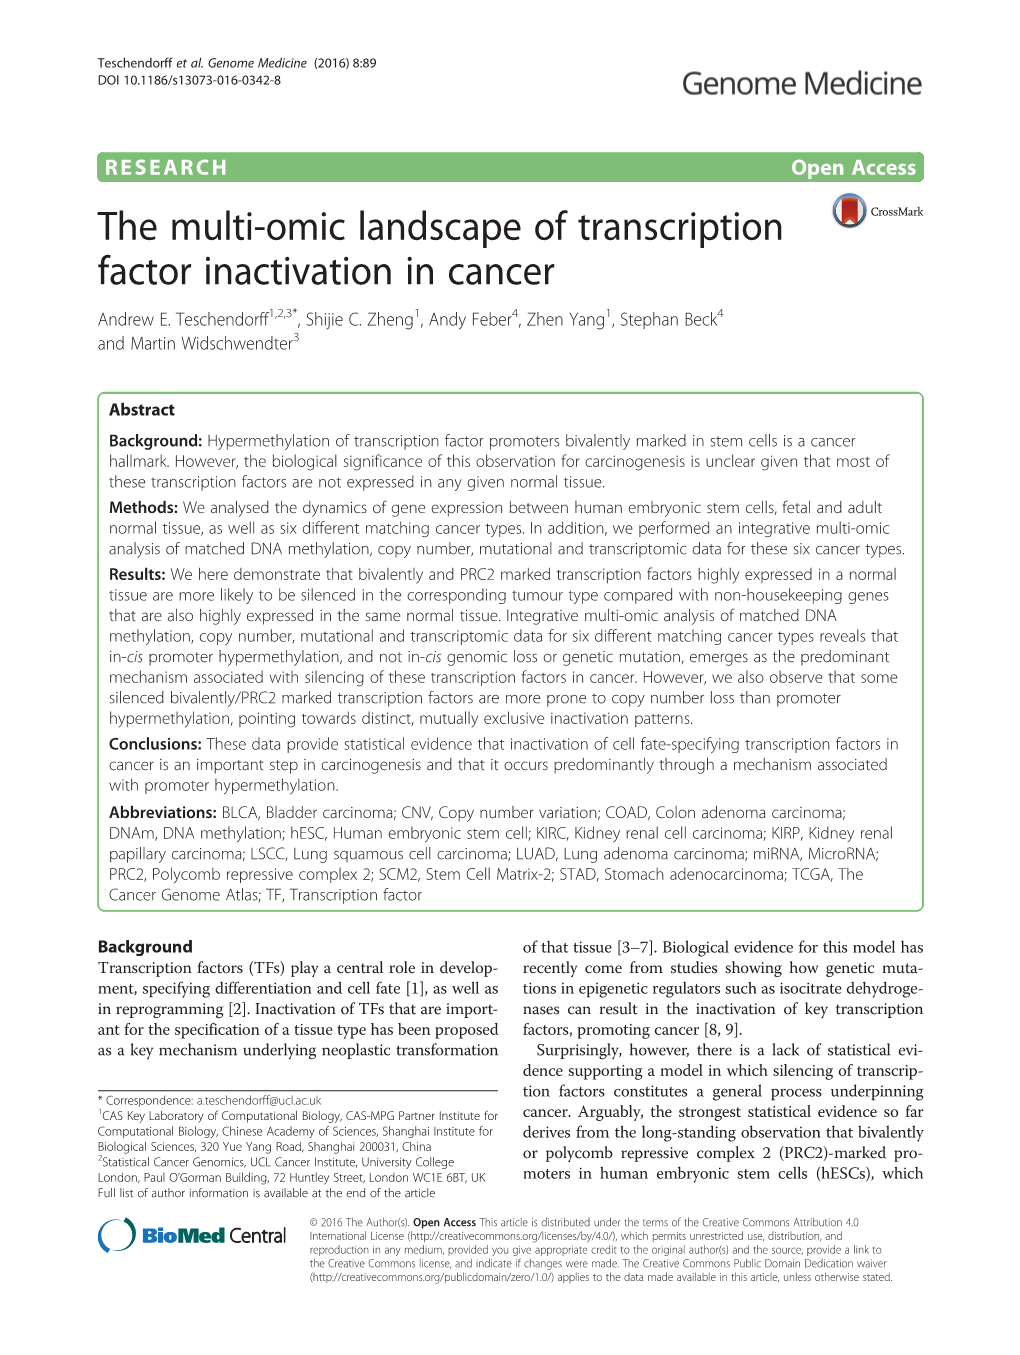 The Multi-Omic Landscape of Transcription Factor Inactivation in Cancer Andrew E